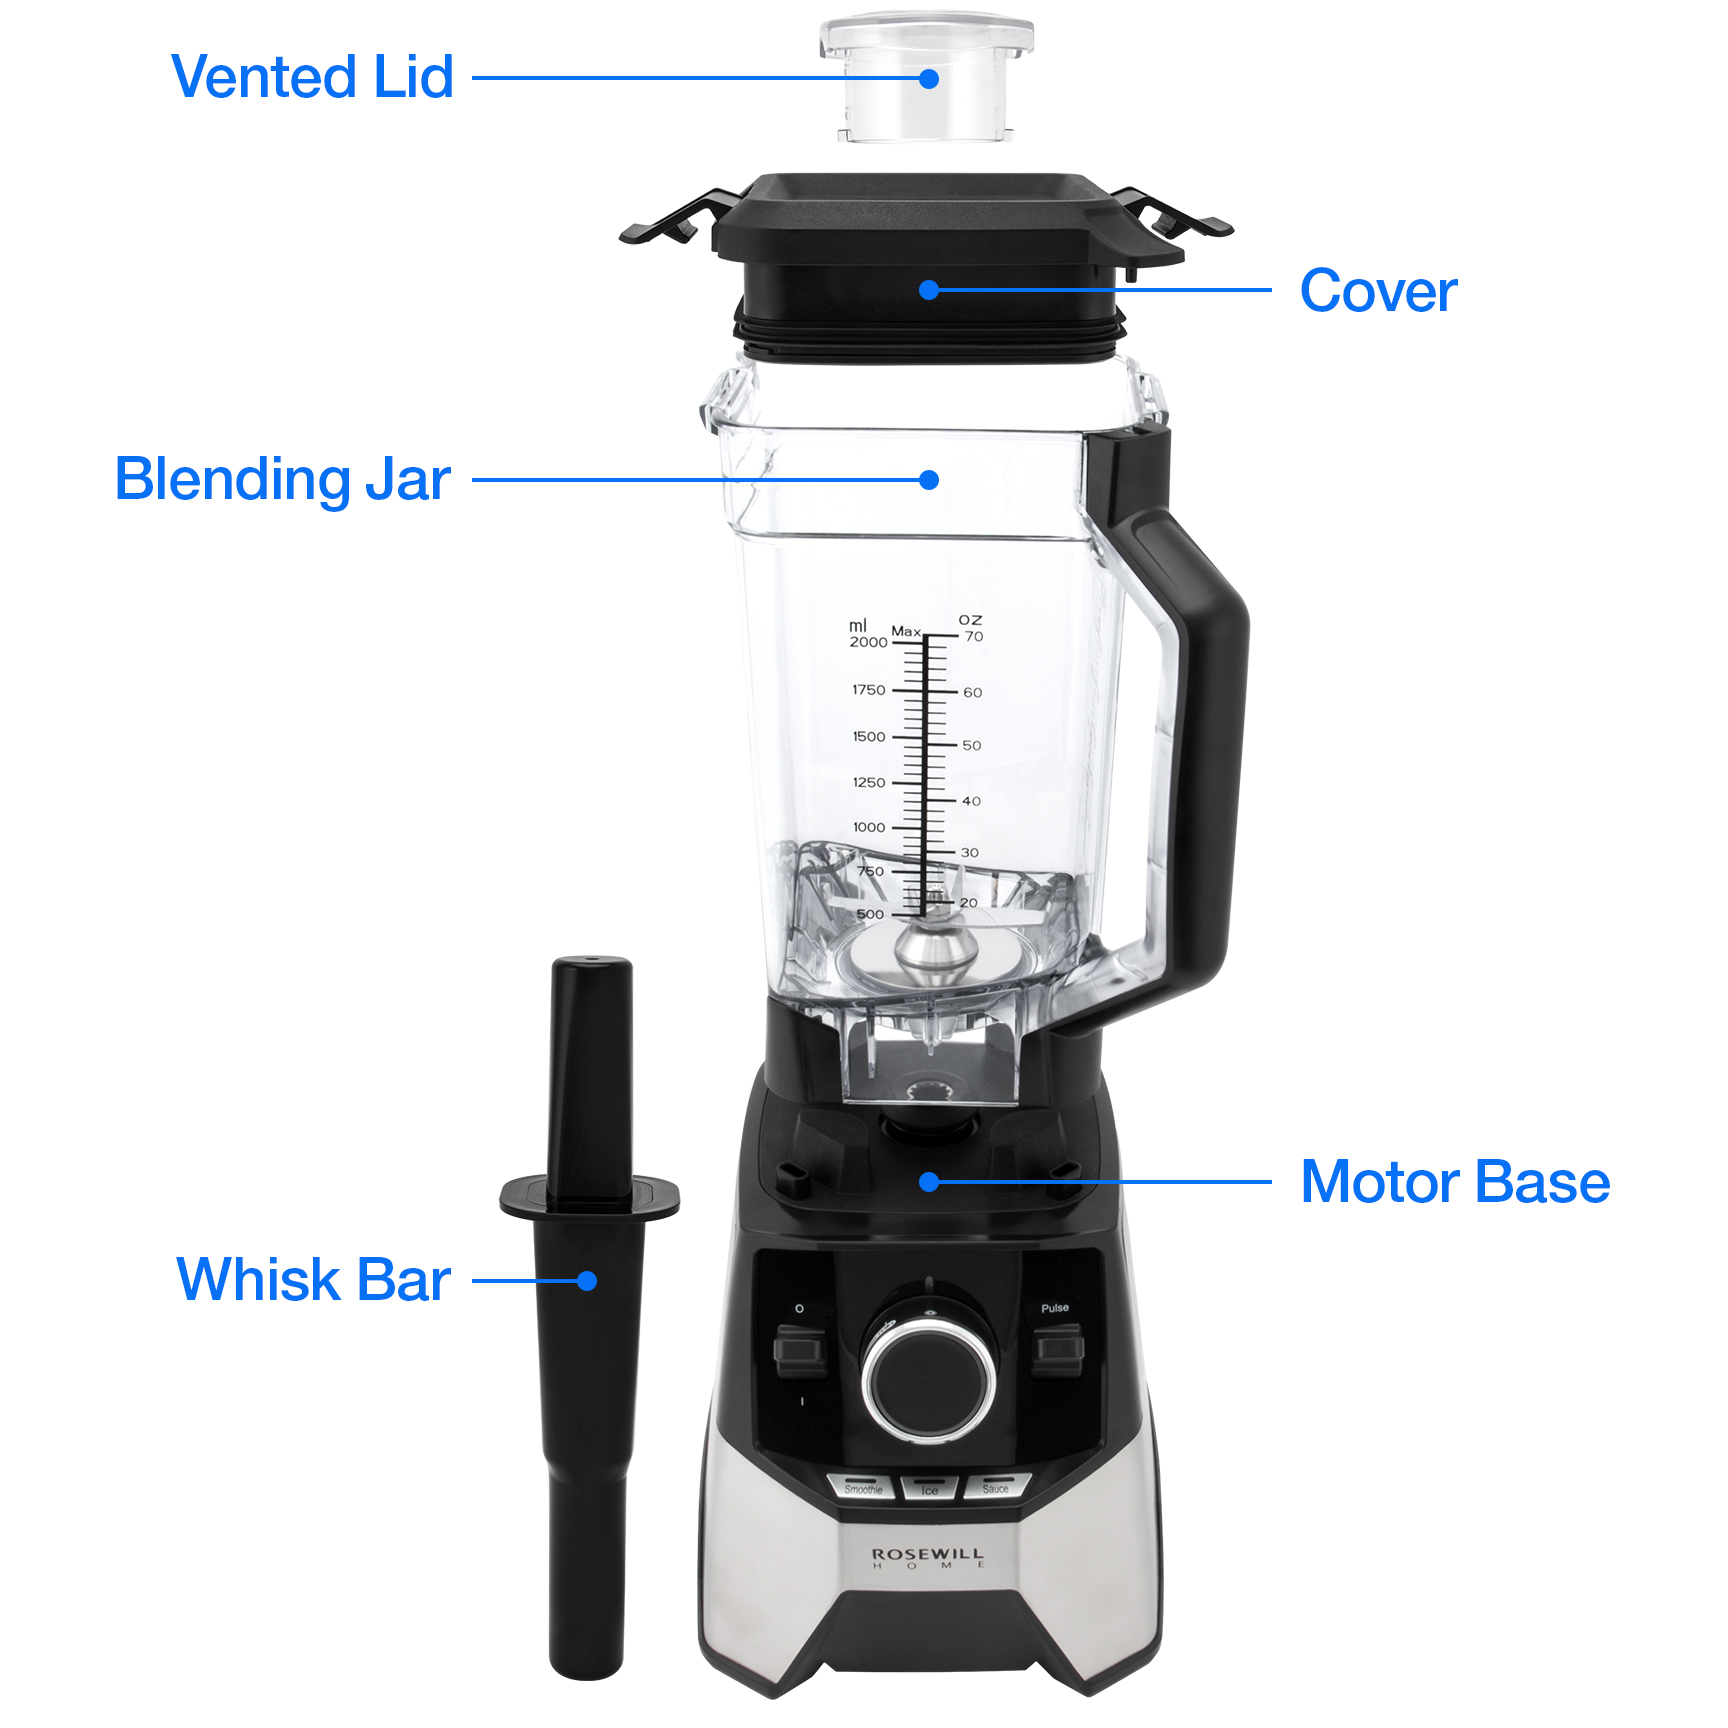 Rosewill Professional Blender, Industrial Commercial High Power Speed RHPB-18001 - image 2 of 8